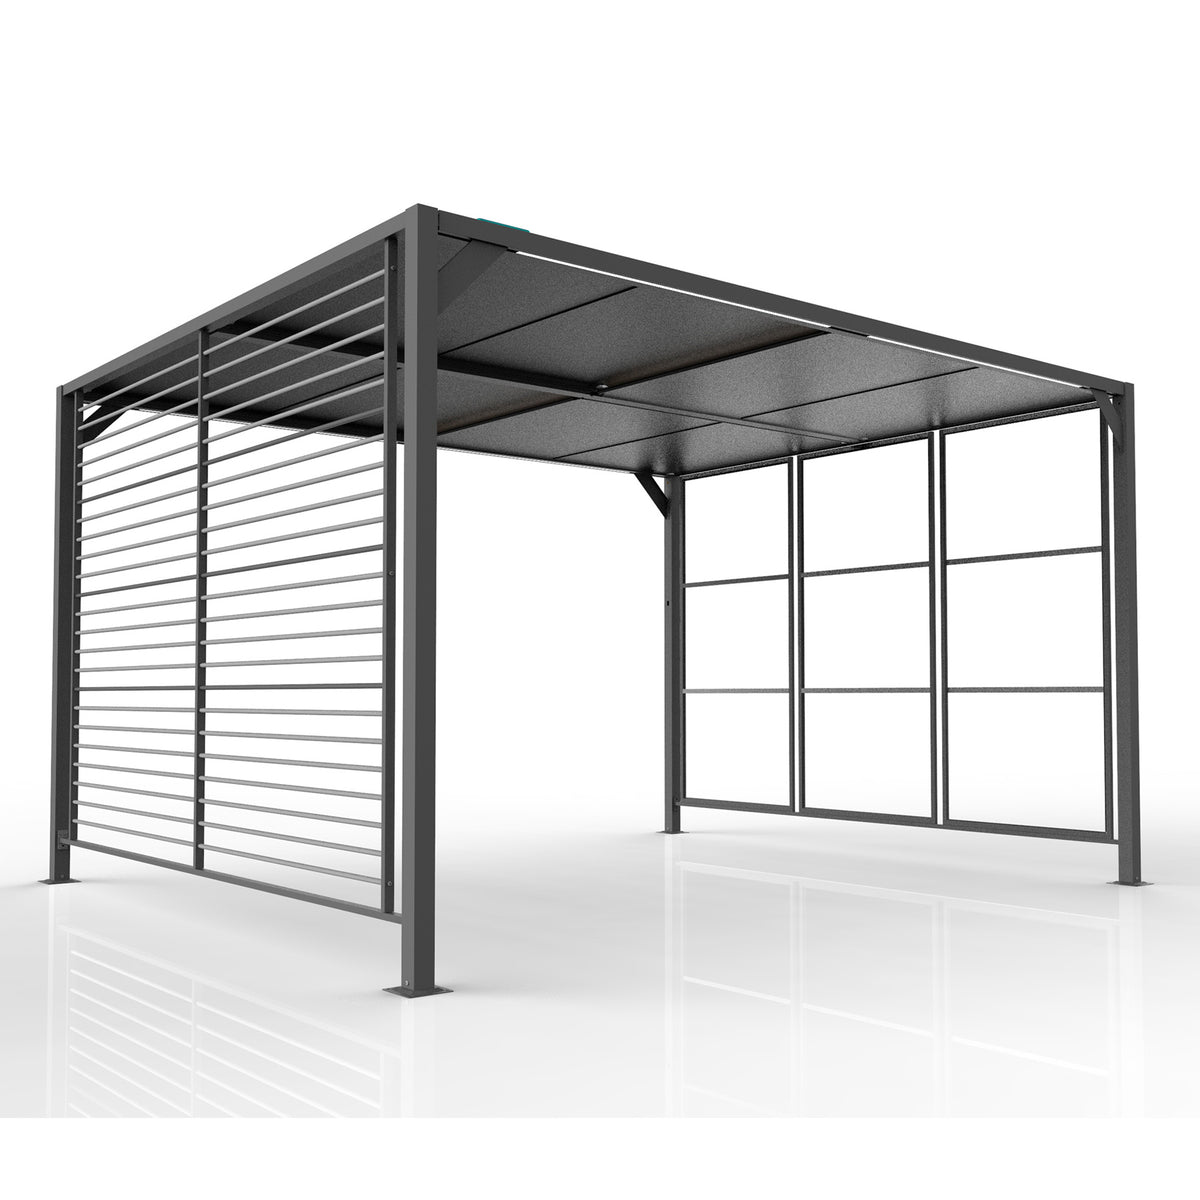 Kettler Panalsol Deluxe 3m x 3.5m Grey Gazebo with LED Solar Lights